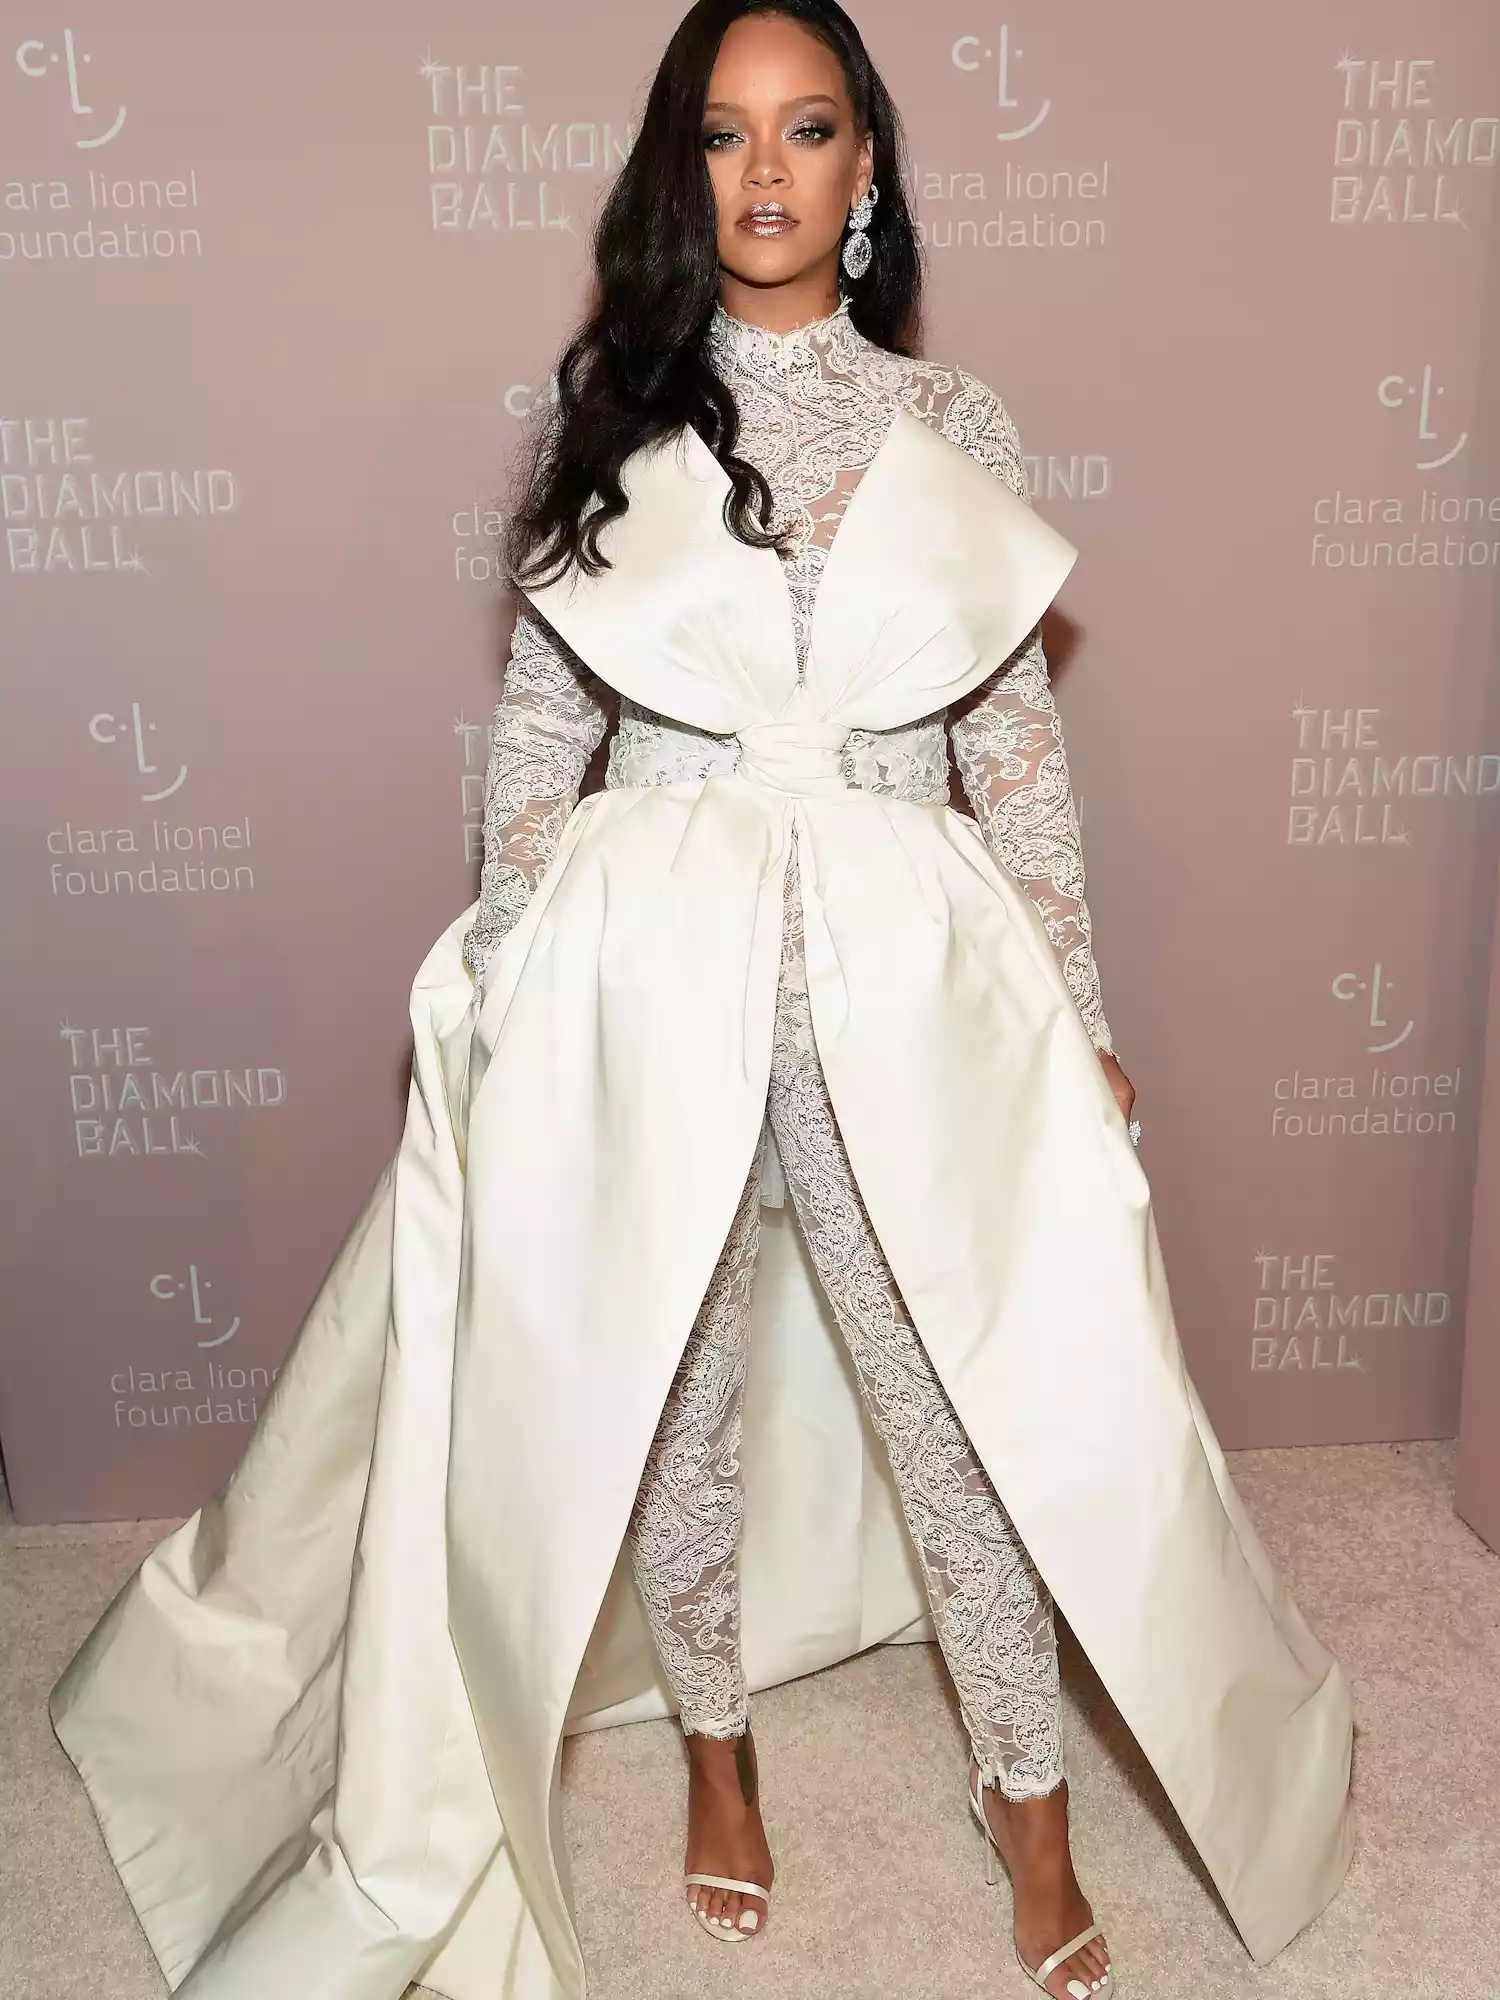 Rihanna wears a lace catsuit with oversized bow and overskirt to her 4th annual Diamond Ball